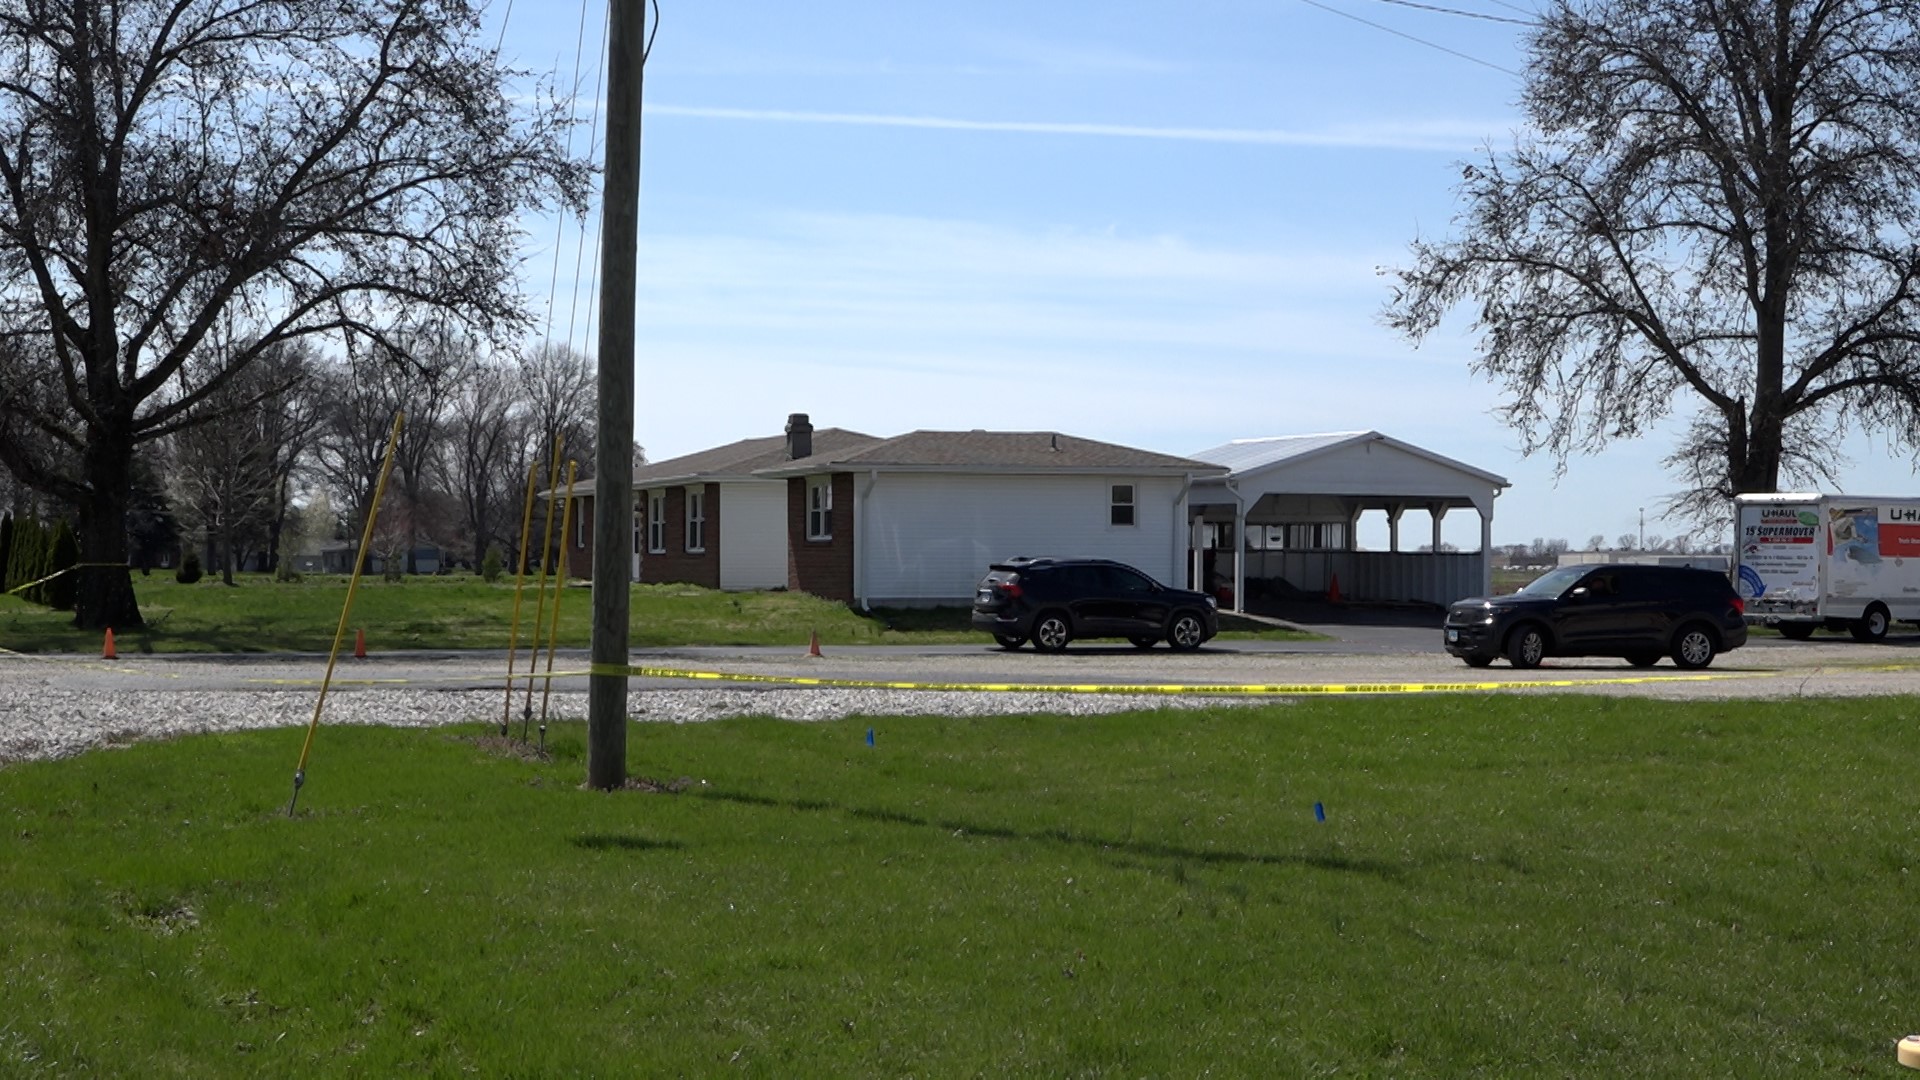 Authorities identified the victims as Jamie Joiner and Jessica Joiner. Jessica was helping her sister move out of the home she shared with the man who shot them.